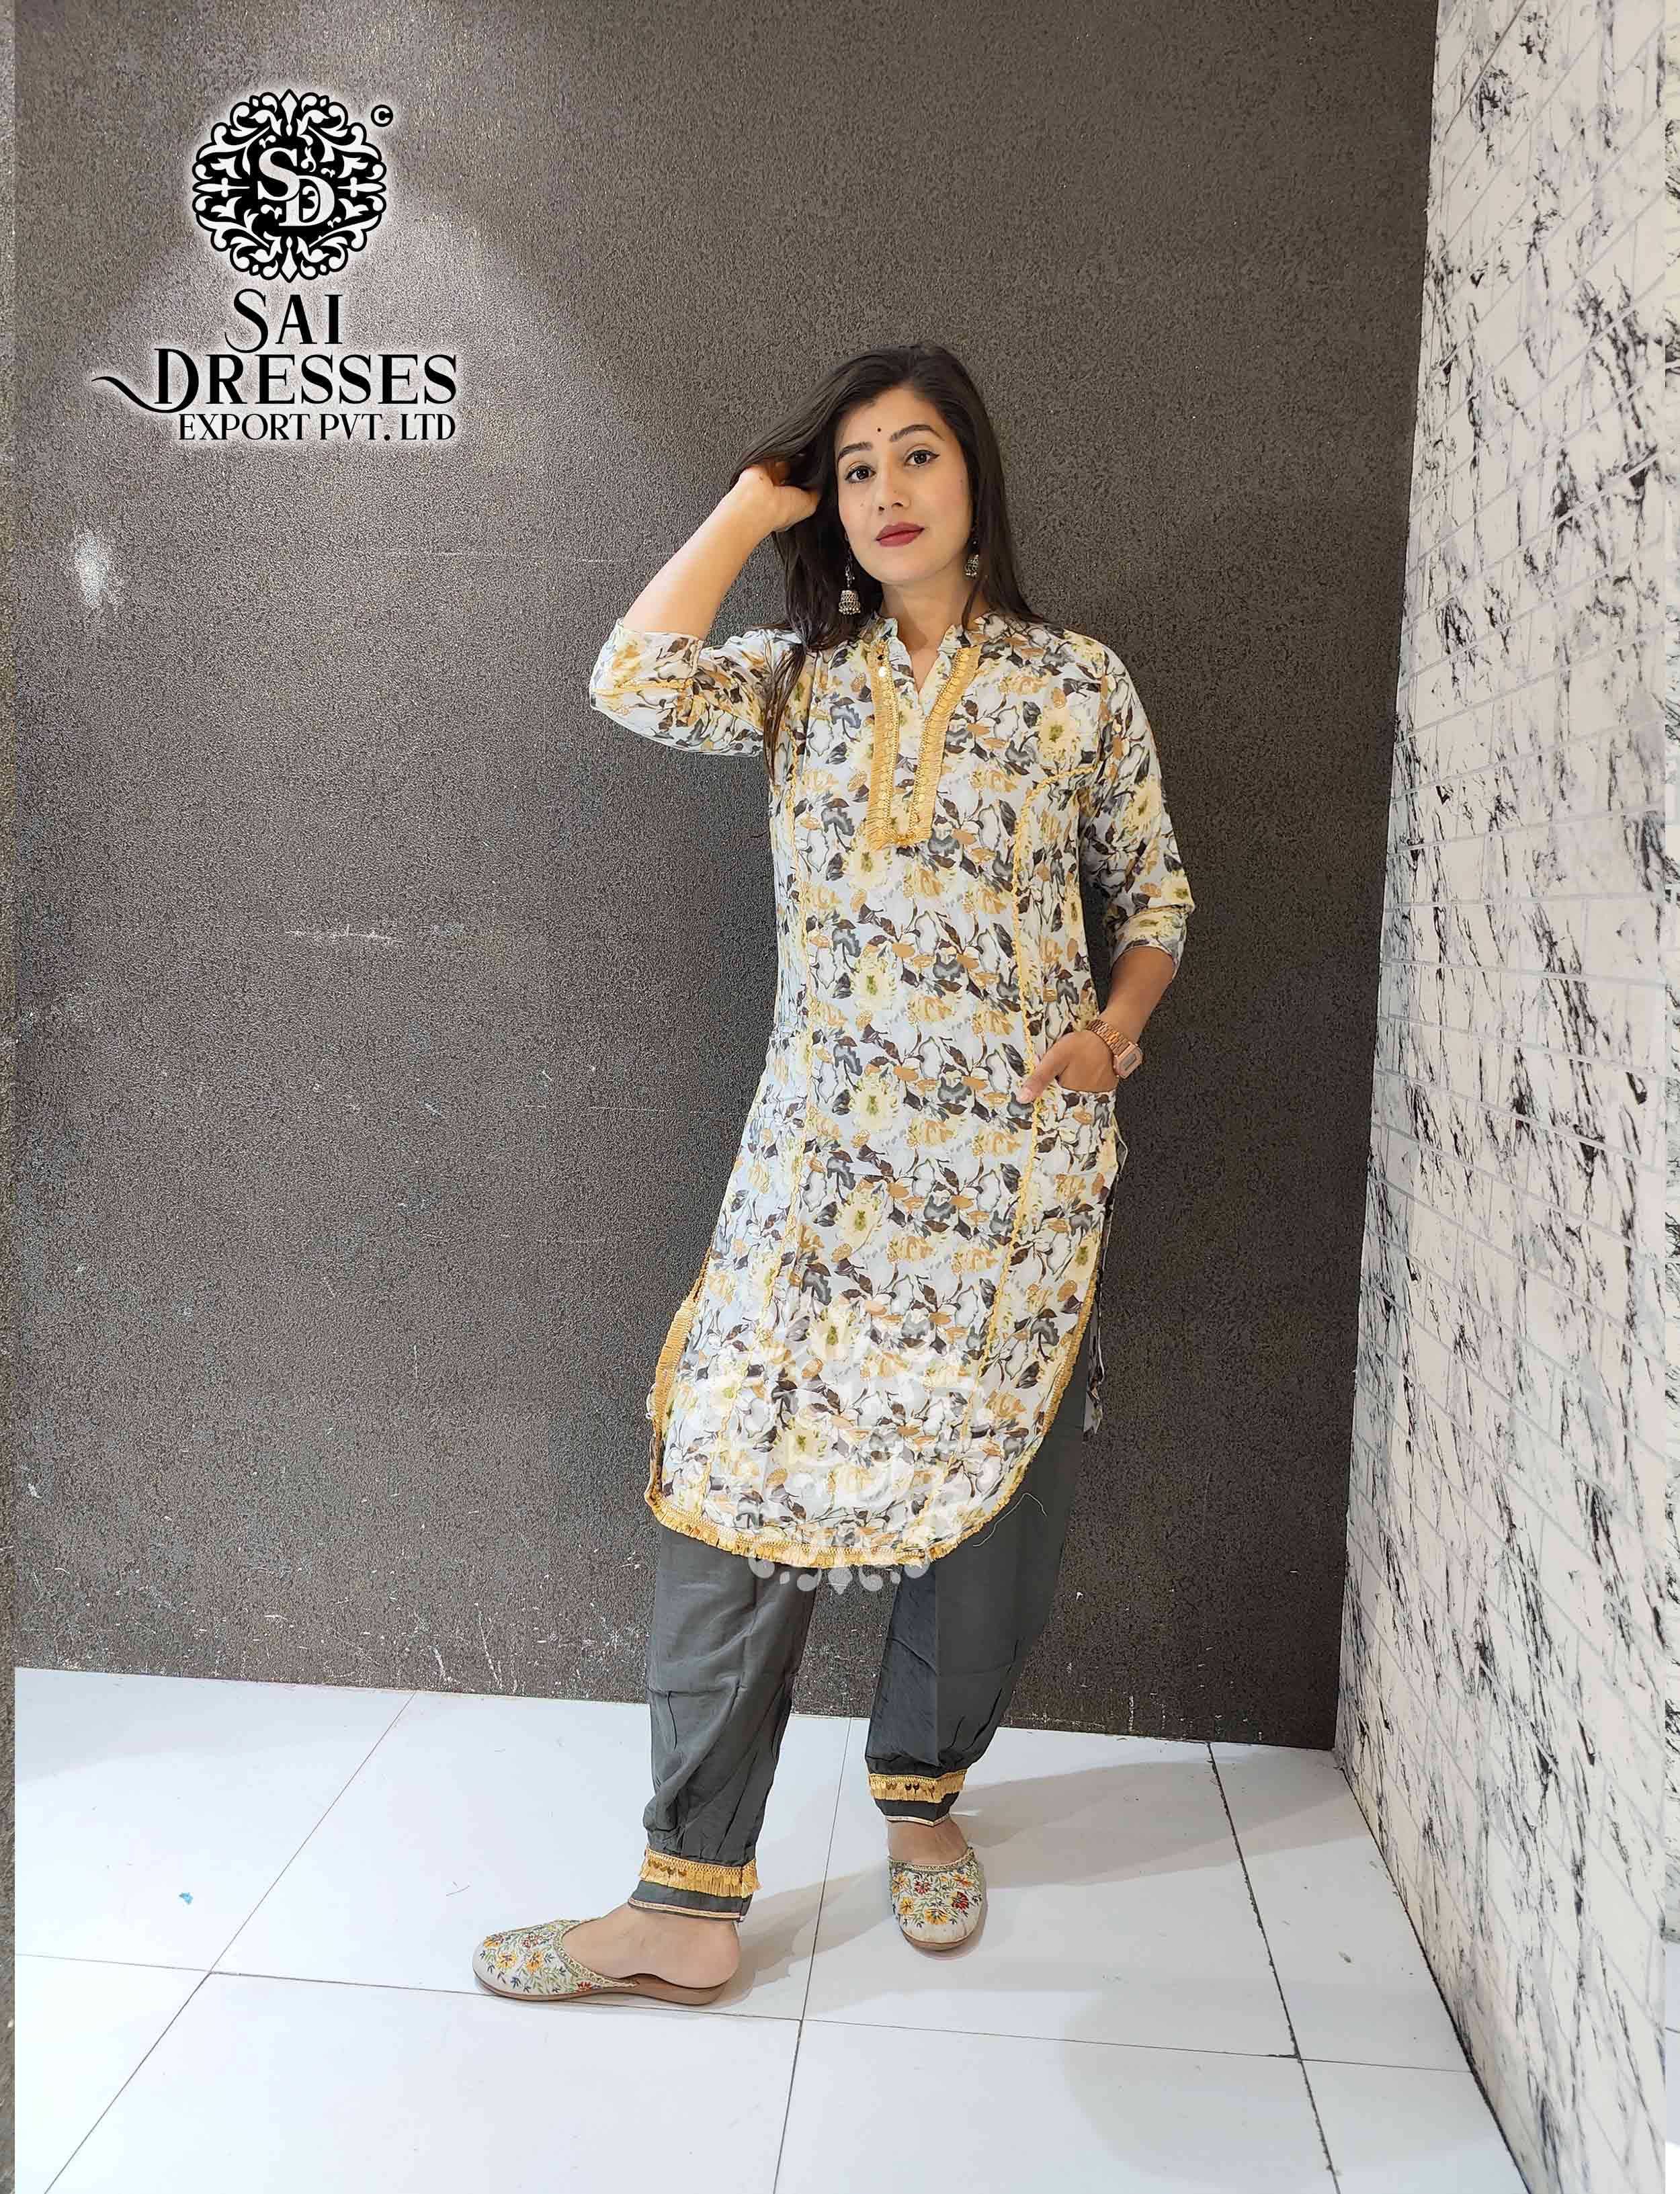 SAI DRESSES PRESENT D.NO 2018 READY TO EXCLUSIVE TRENDY WEAR PATHANI KURTA WITH AFGHANI PANT STYLE COMBO COLLECTION IN WHOLESALE RATE IN SURAT